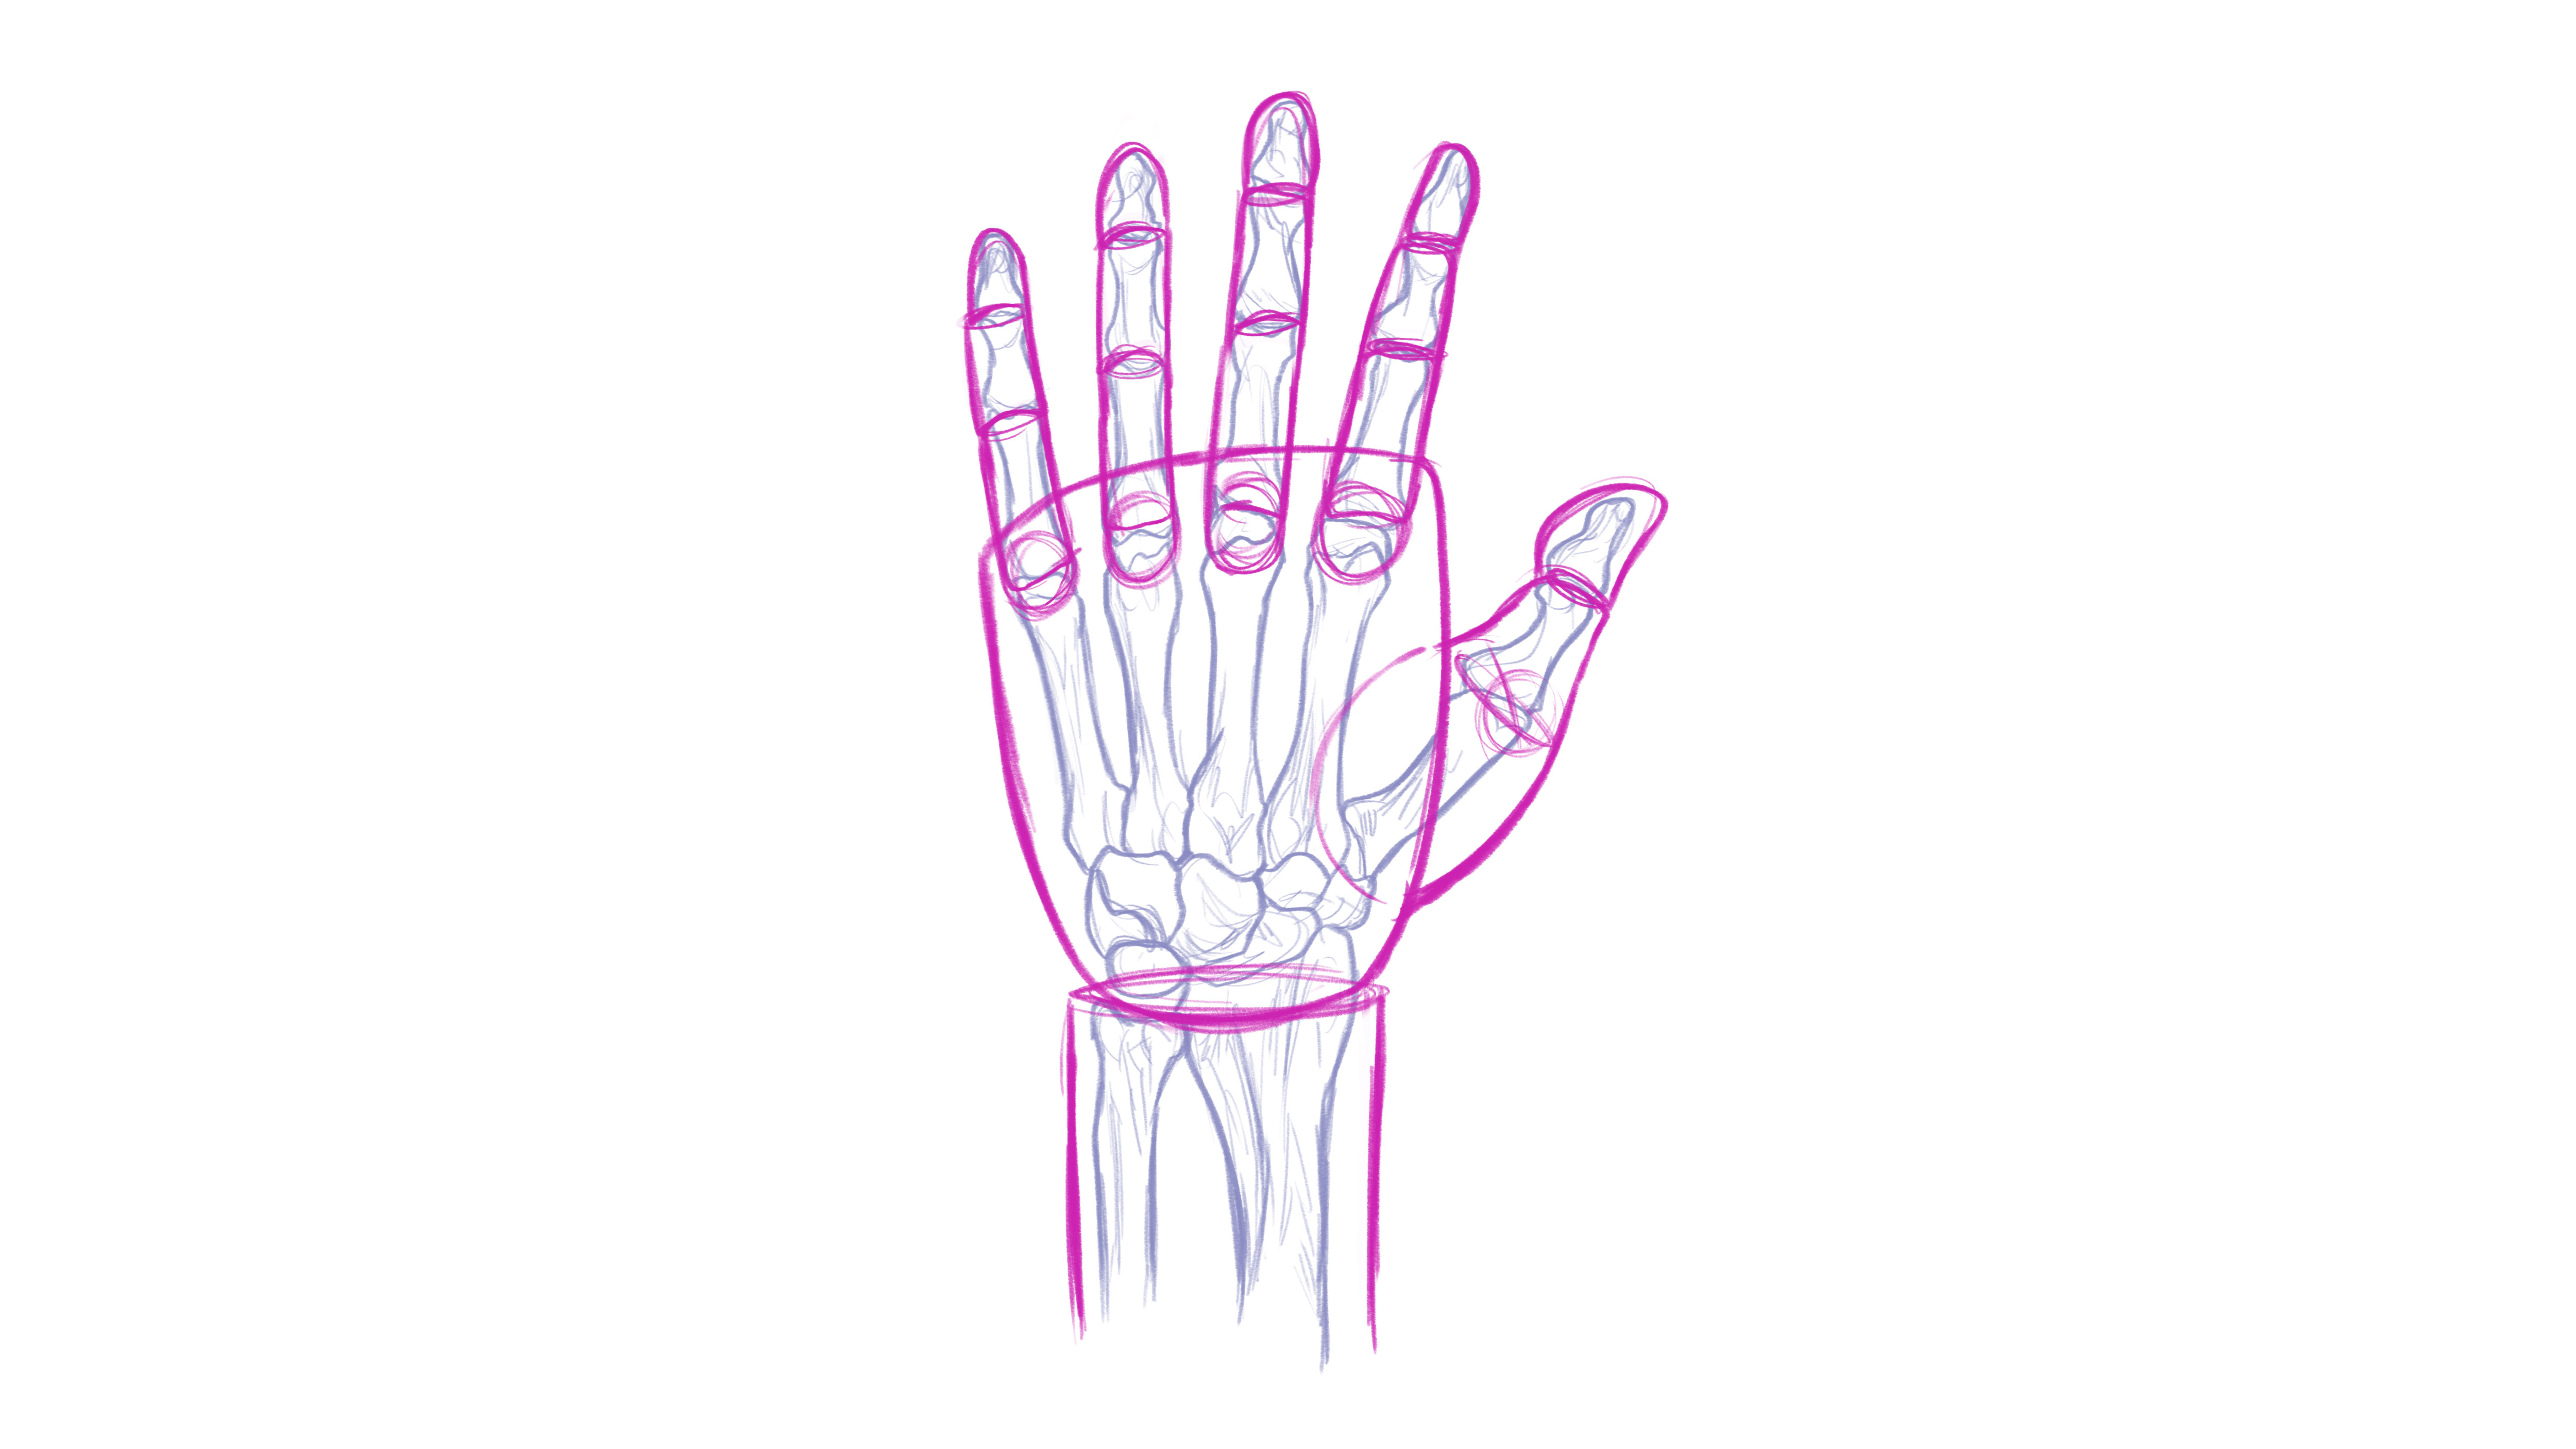 Human Anatomy Fundamentals: How to Draw Hands